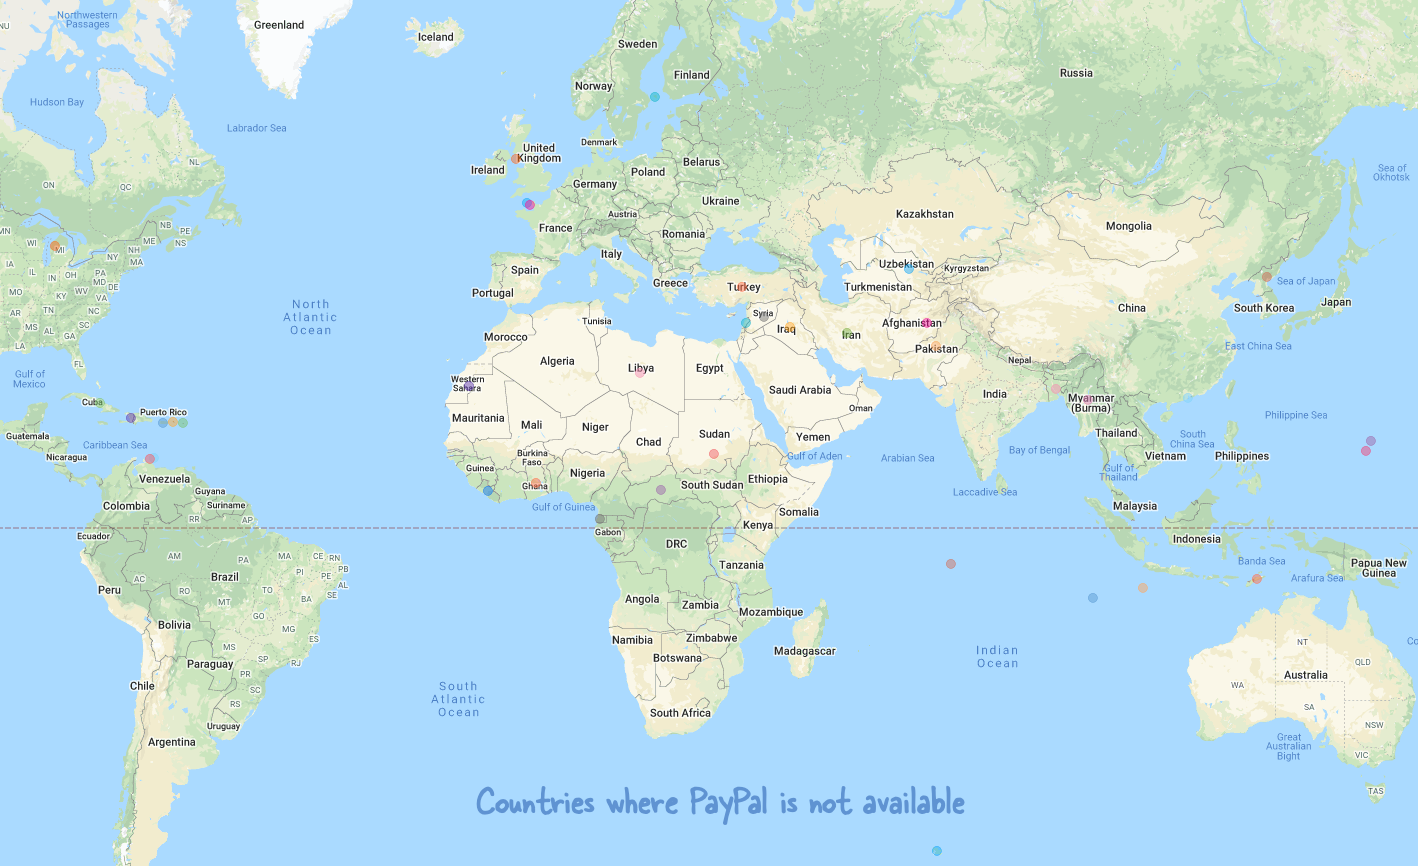 Countries where PayPal is not available